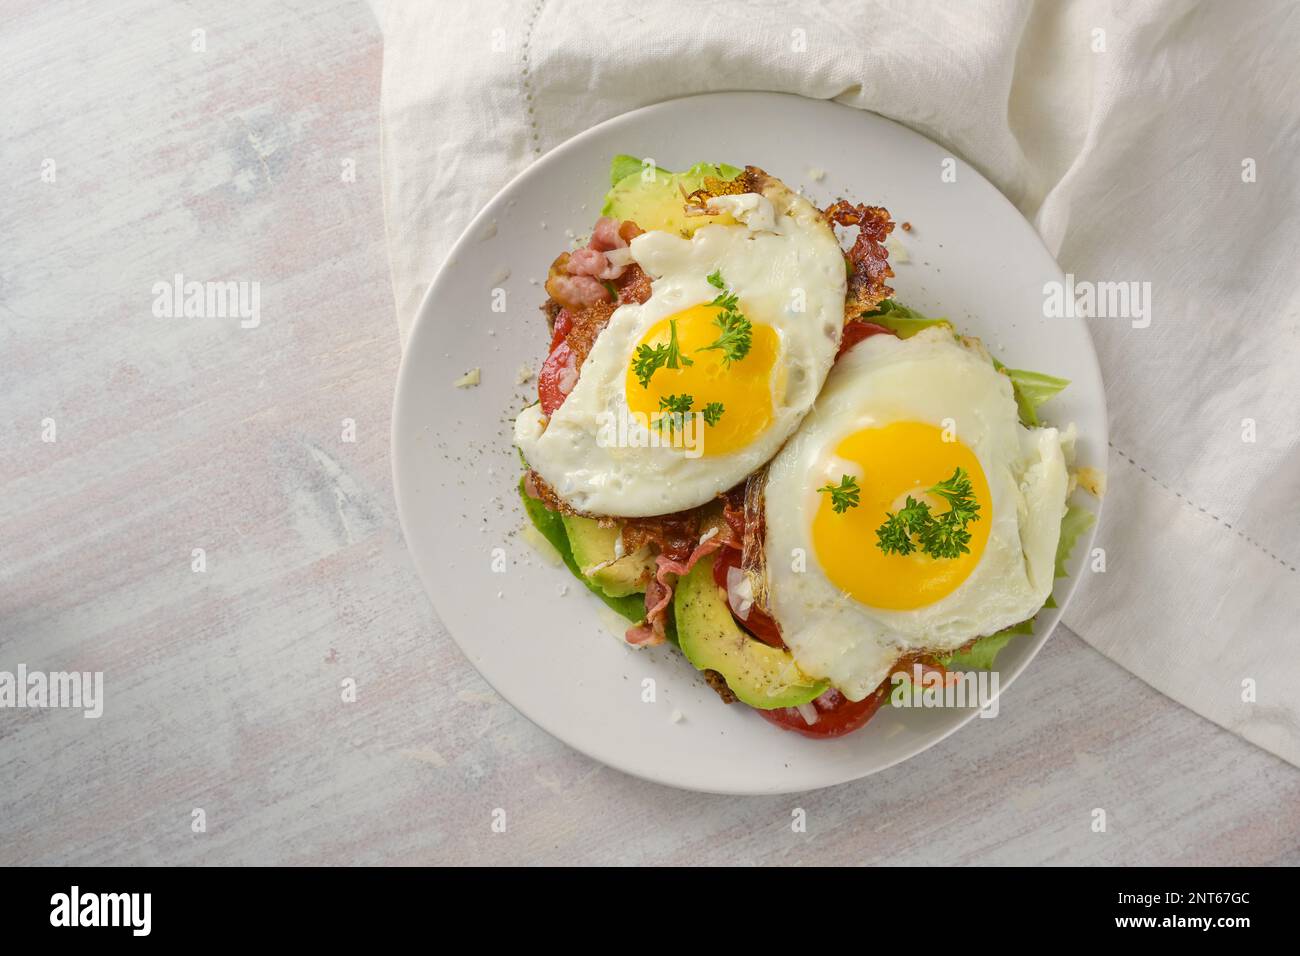 Brunch sandwich with fried egg, avocado and bacon on a white plate and a light wooden table, high angle view from above, copy space, selected focus Stock Photo